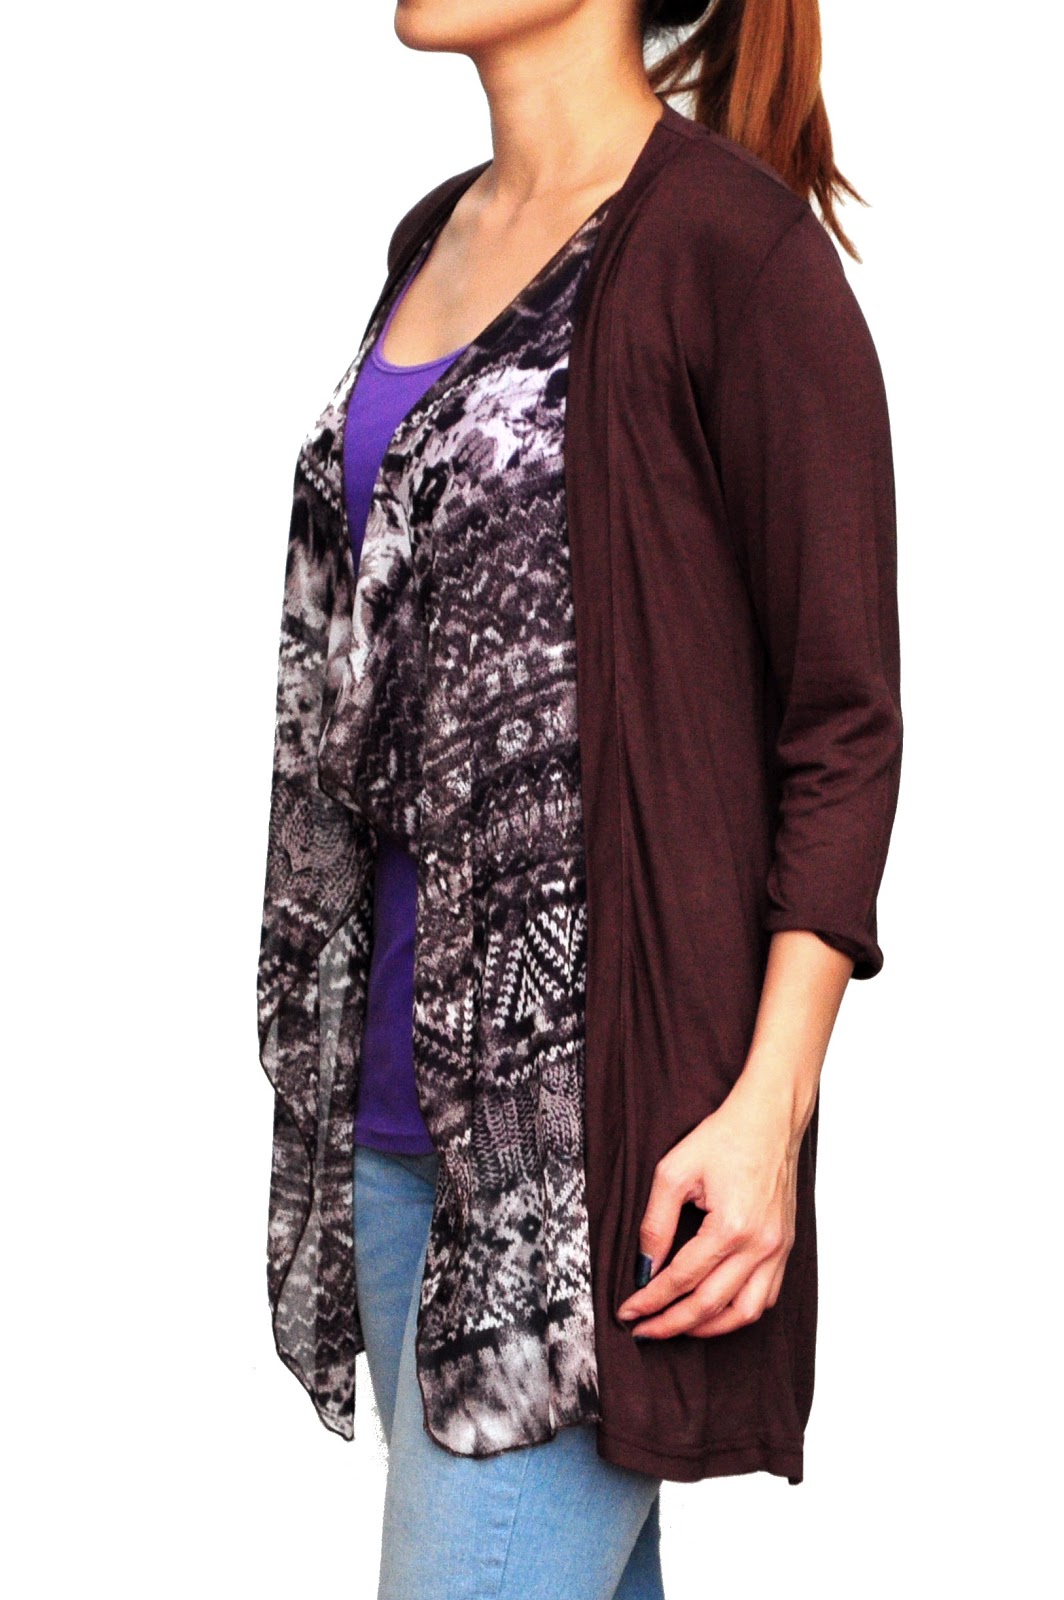 Duo Apparel: Cardigan with floral chiffon